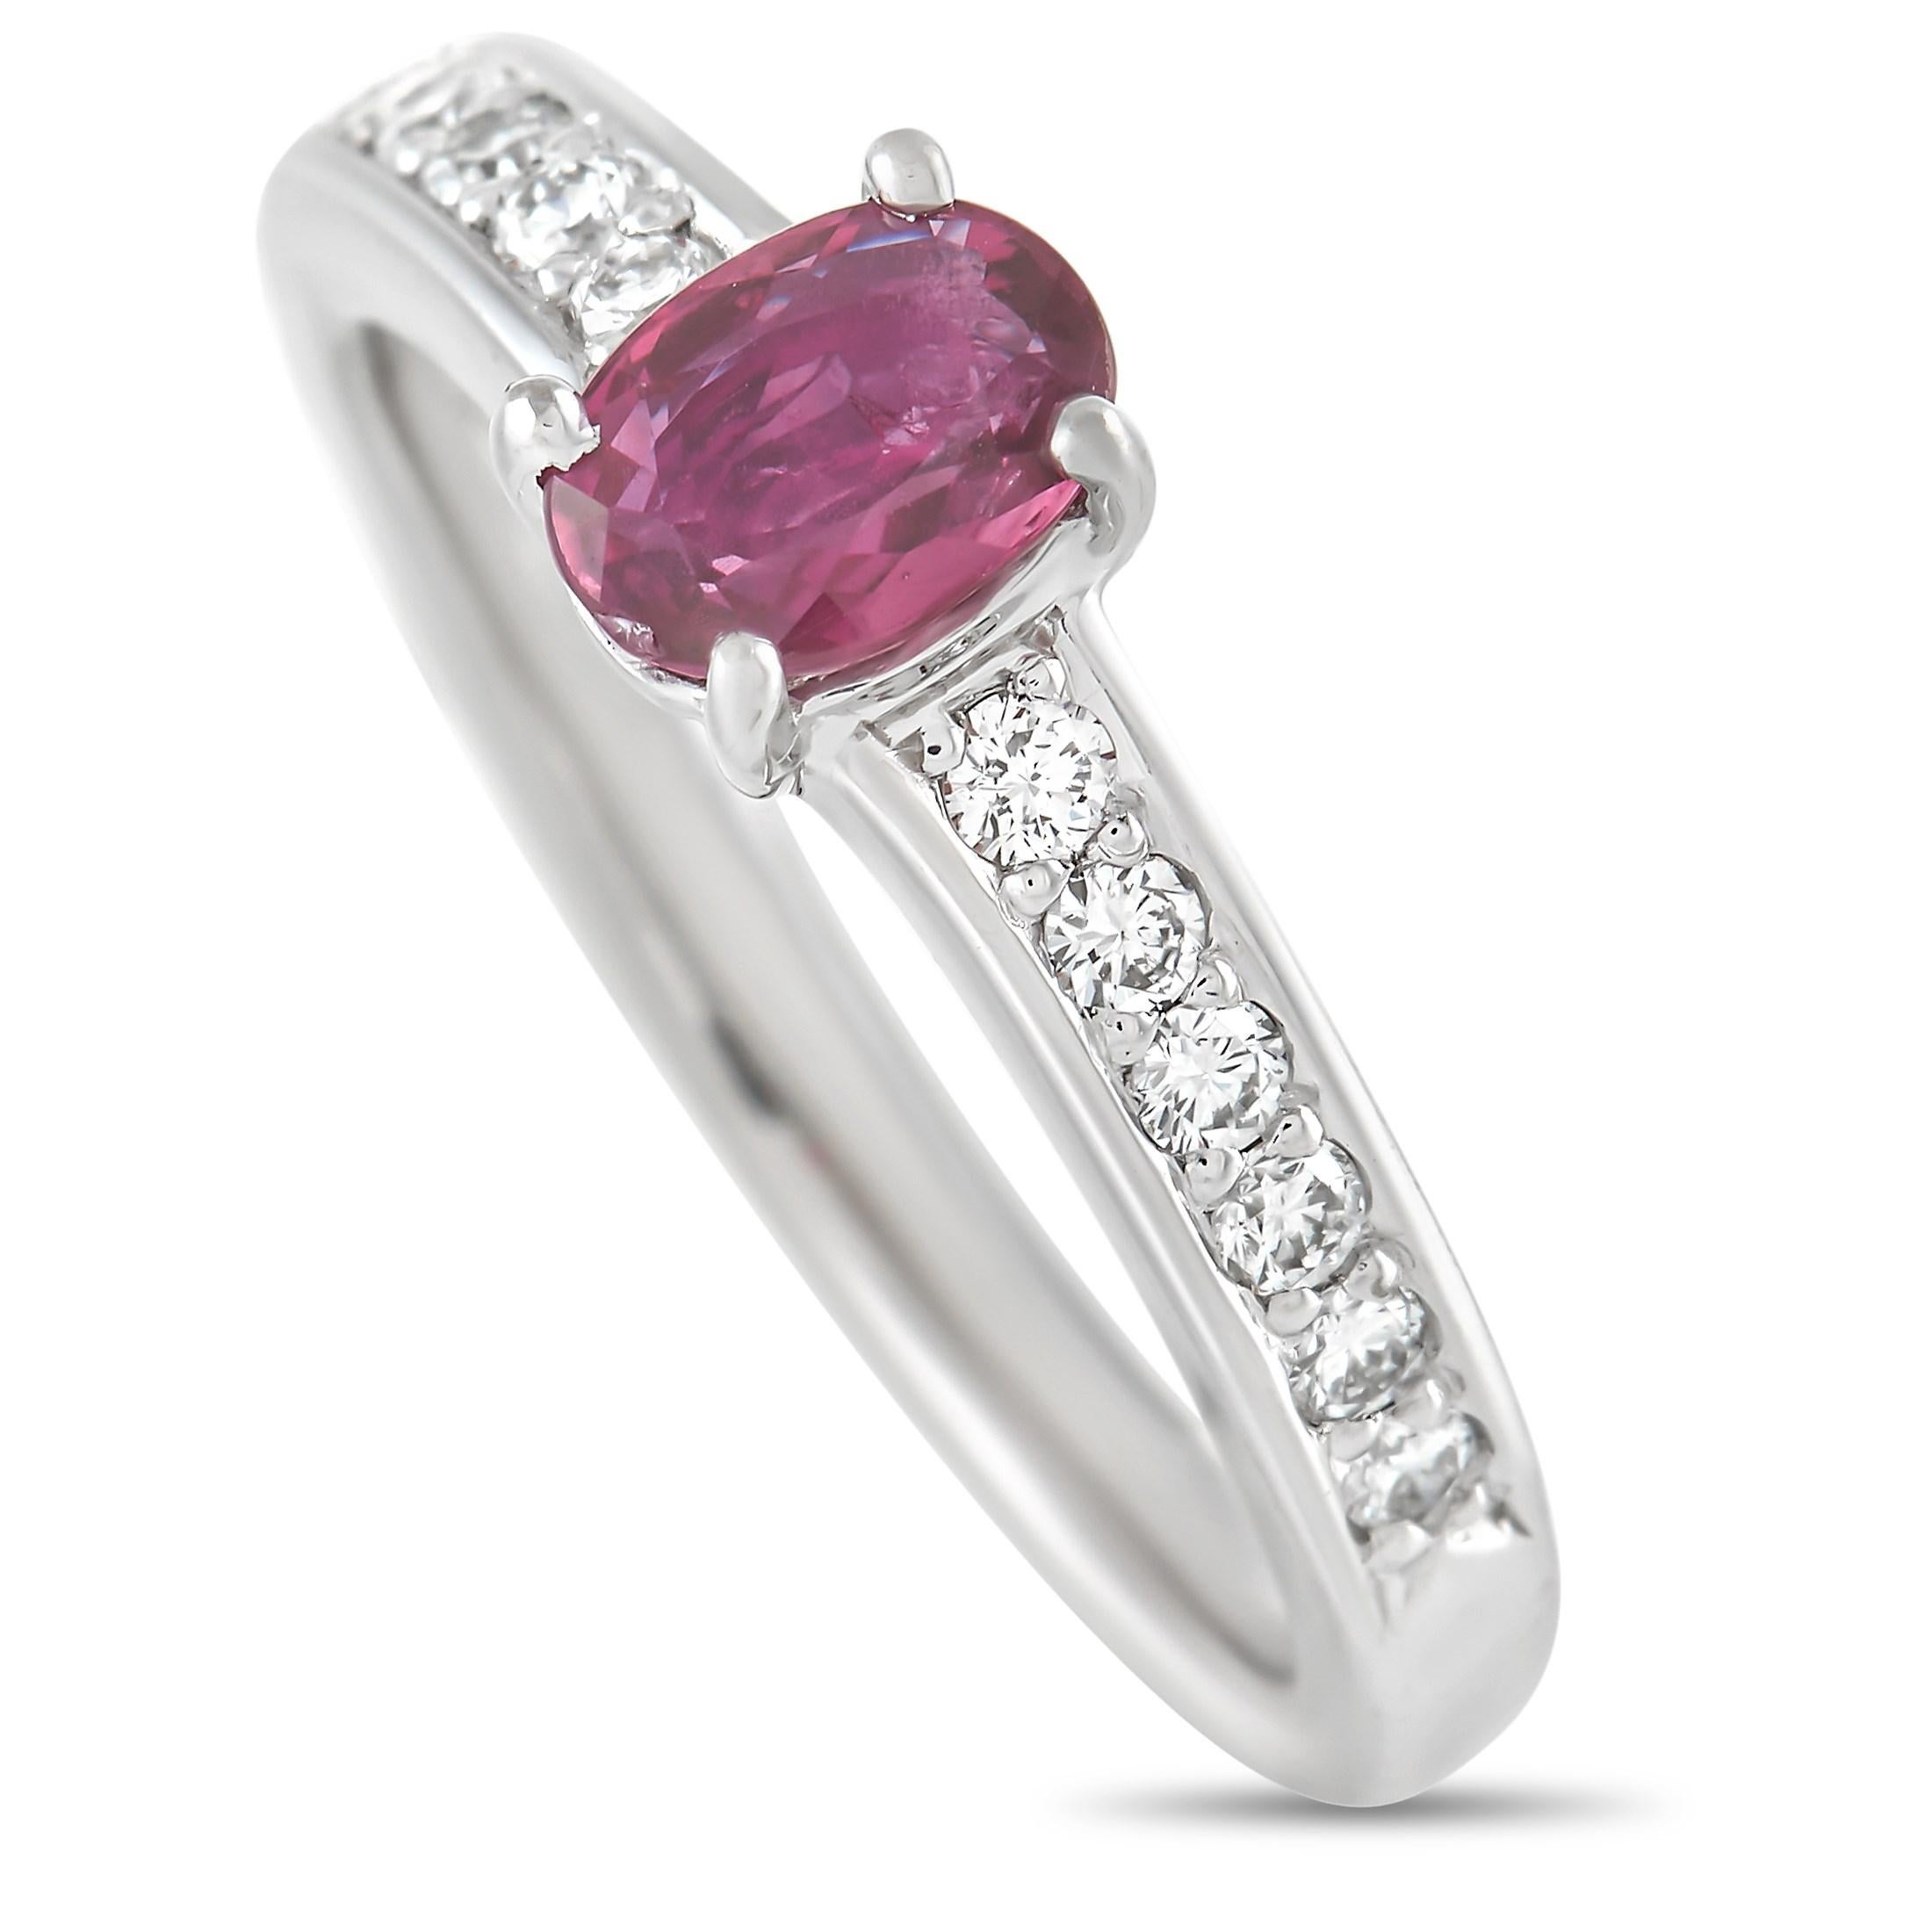 This pretty LB Exclusive ring is the perfect accessory. The band is made with platinum and set with a gorgeous 0.63 carat oval ruby center stone. The sapphire is flanked on either side by a handful of round and marquise cut diamonds totaling 0.60